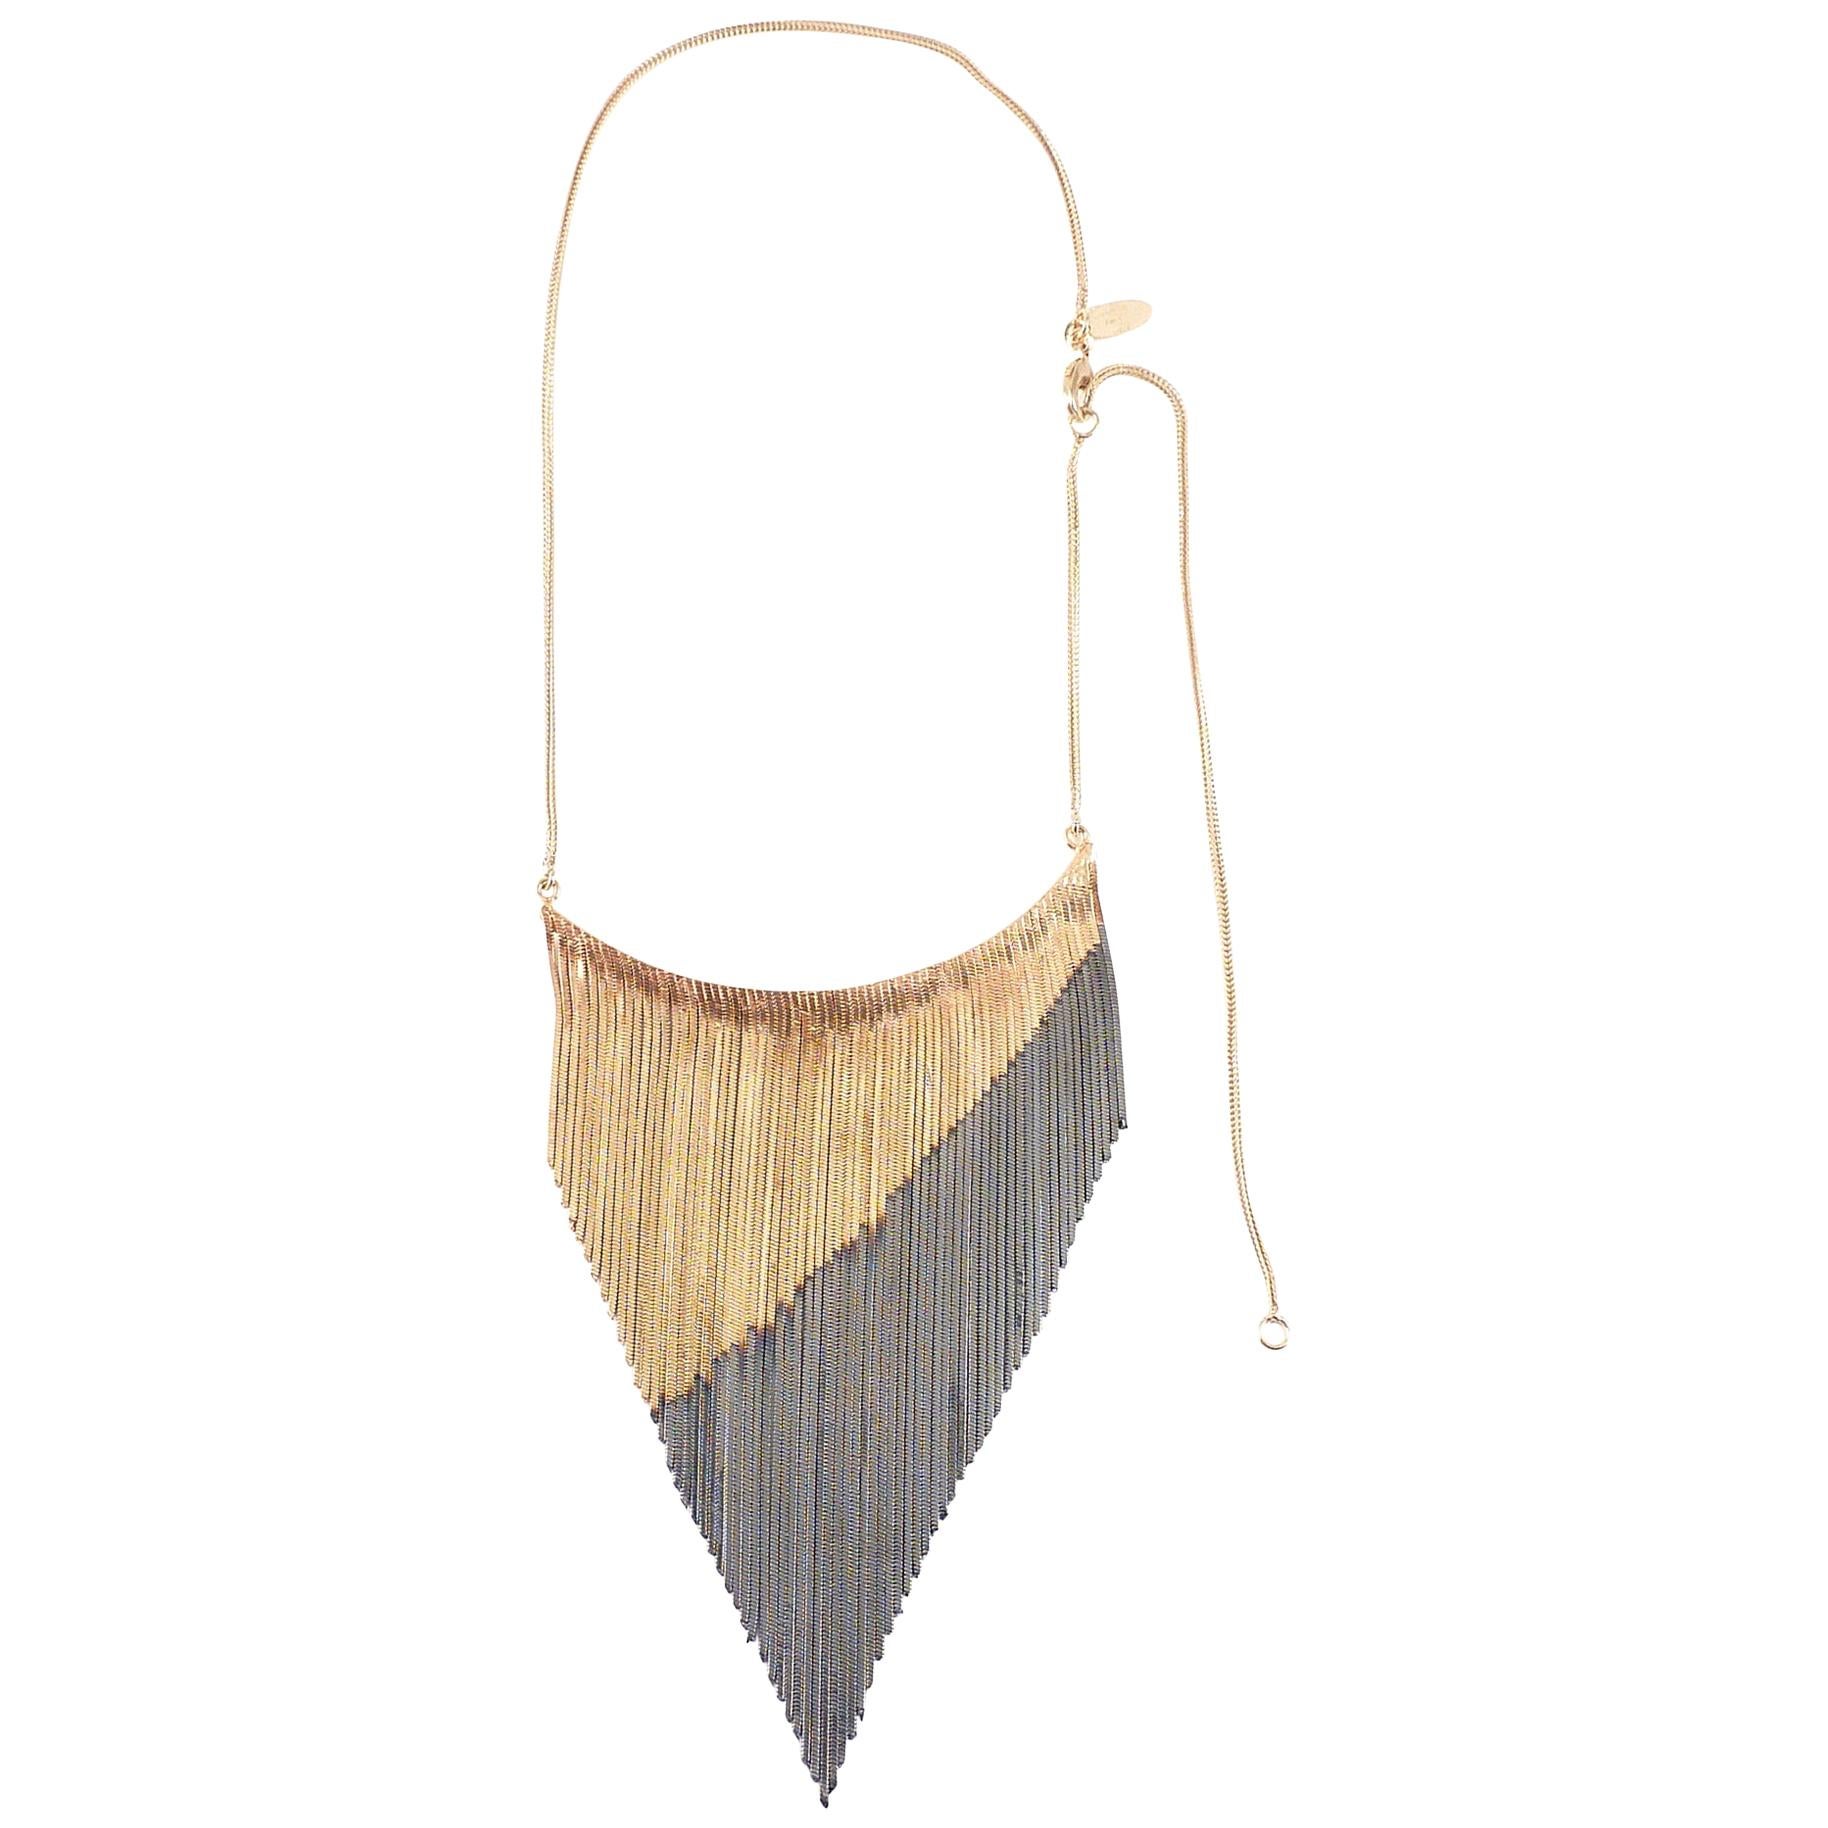 Bib Fringed Necklace with Two Tones 18 Carat Gold Plated from IOSSELLIANI For Sale